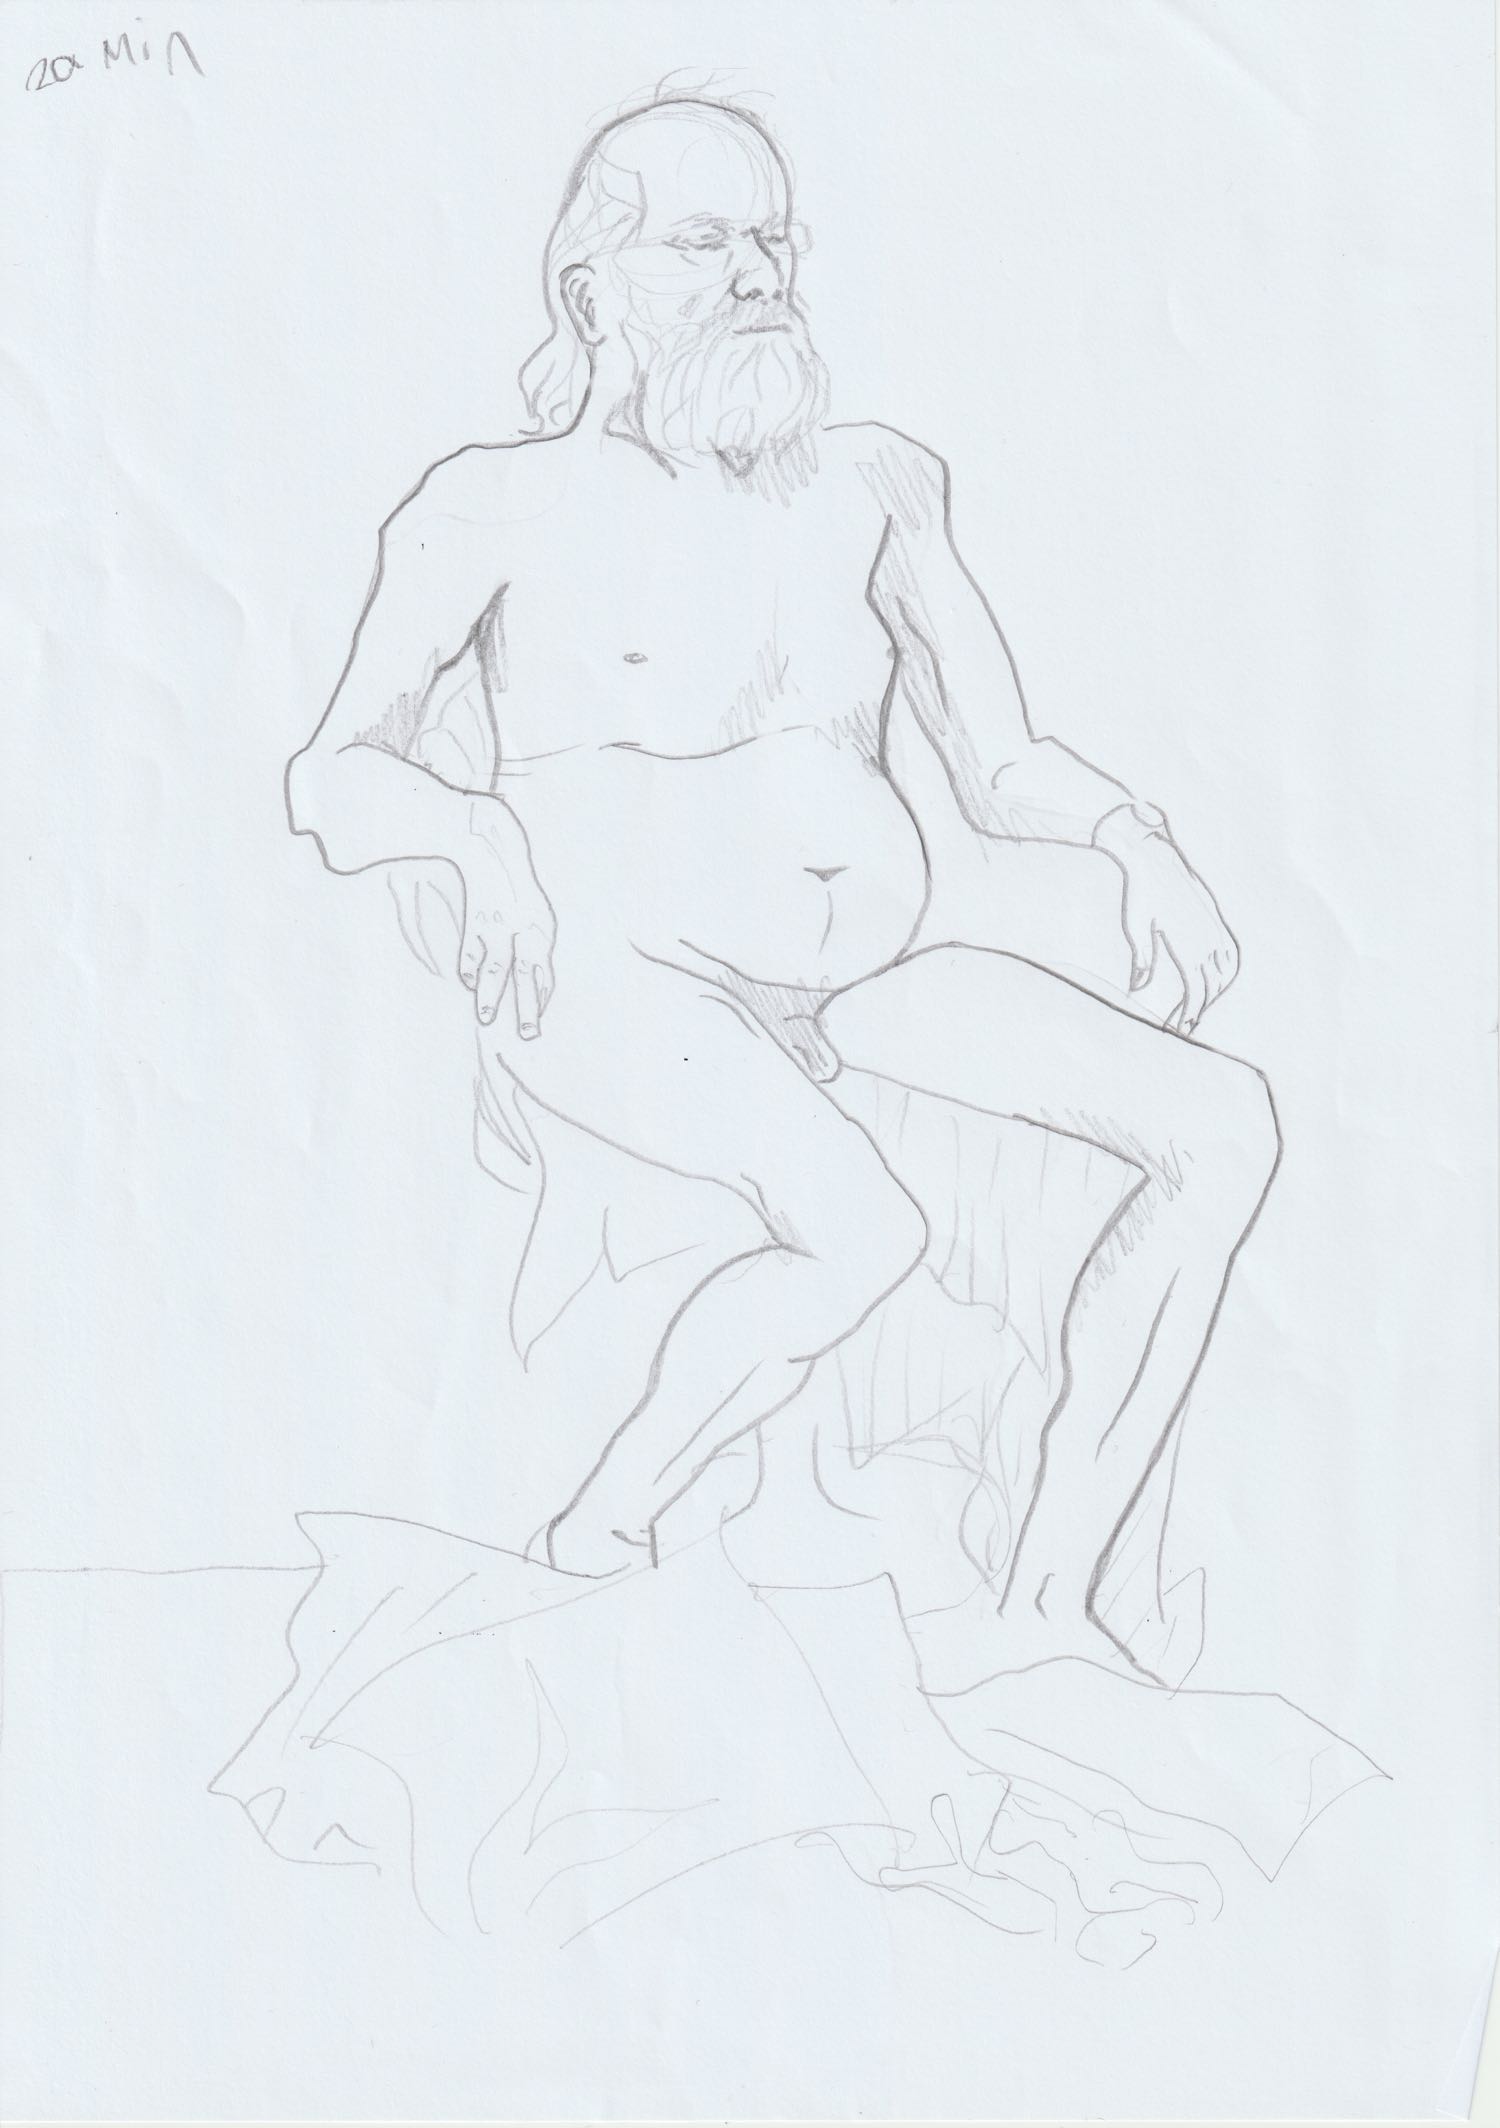 Pencil drawing of man sitting on chair